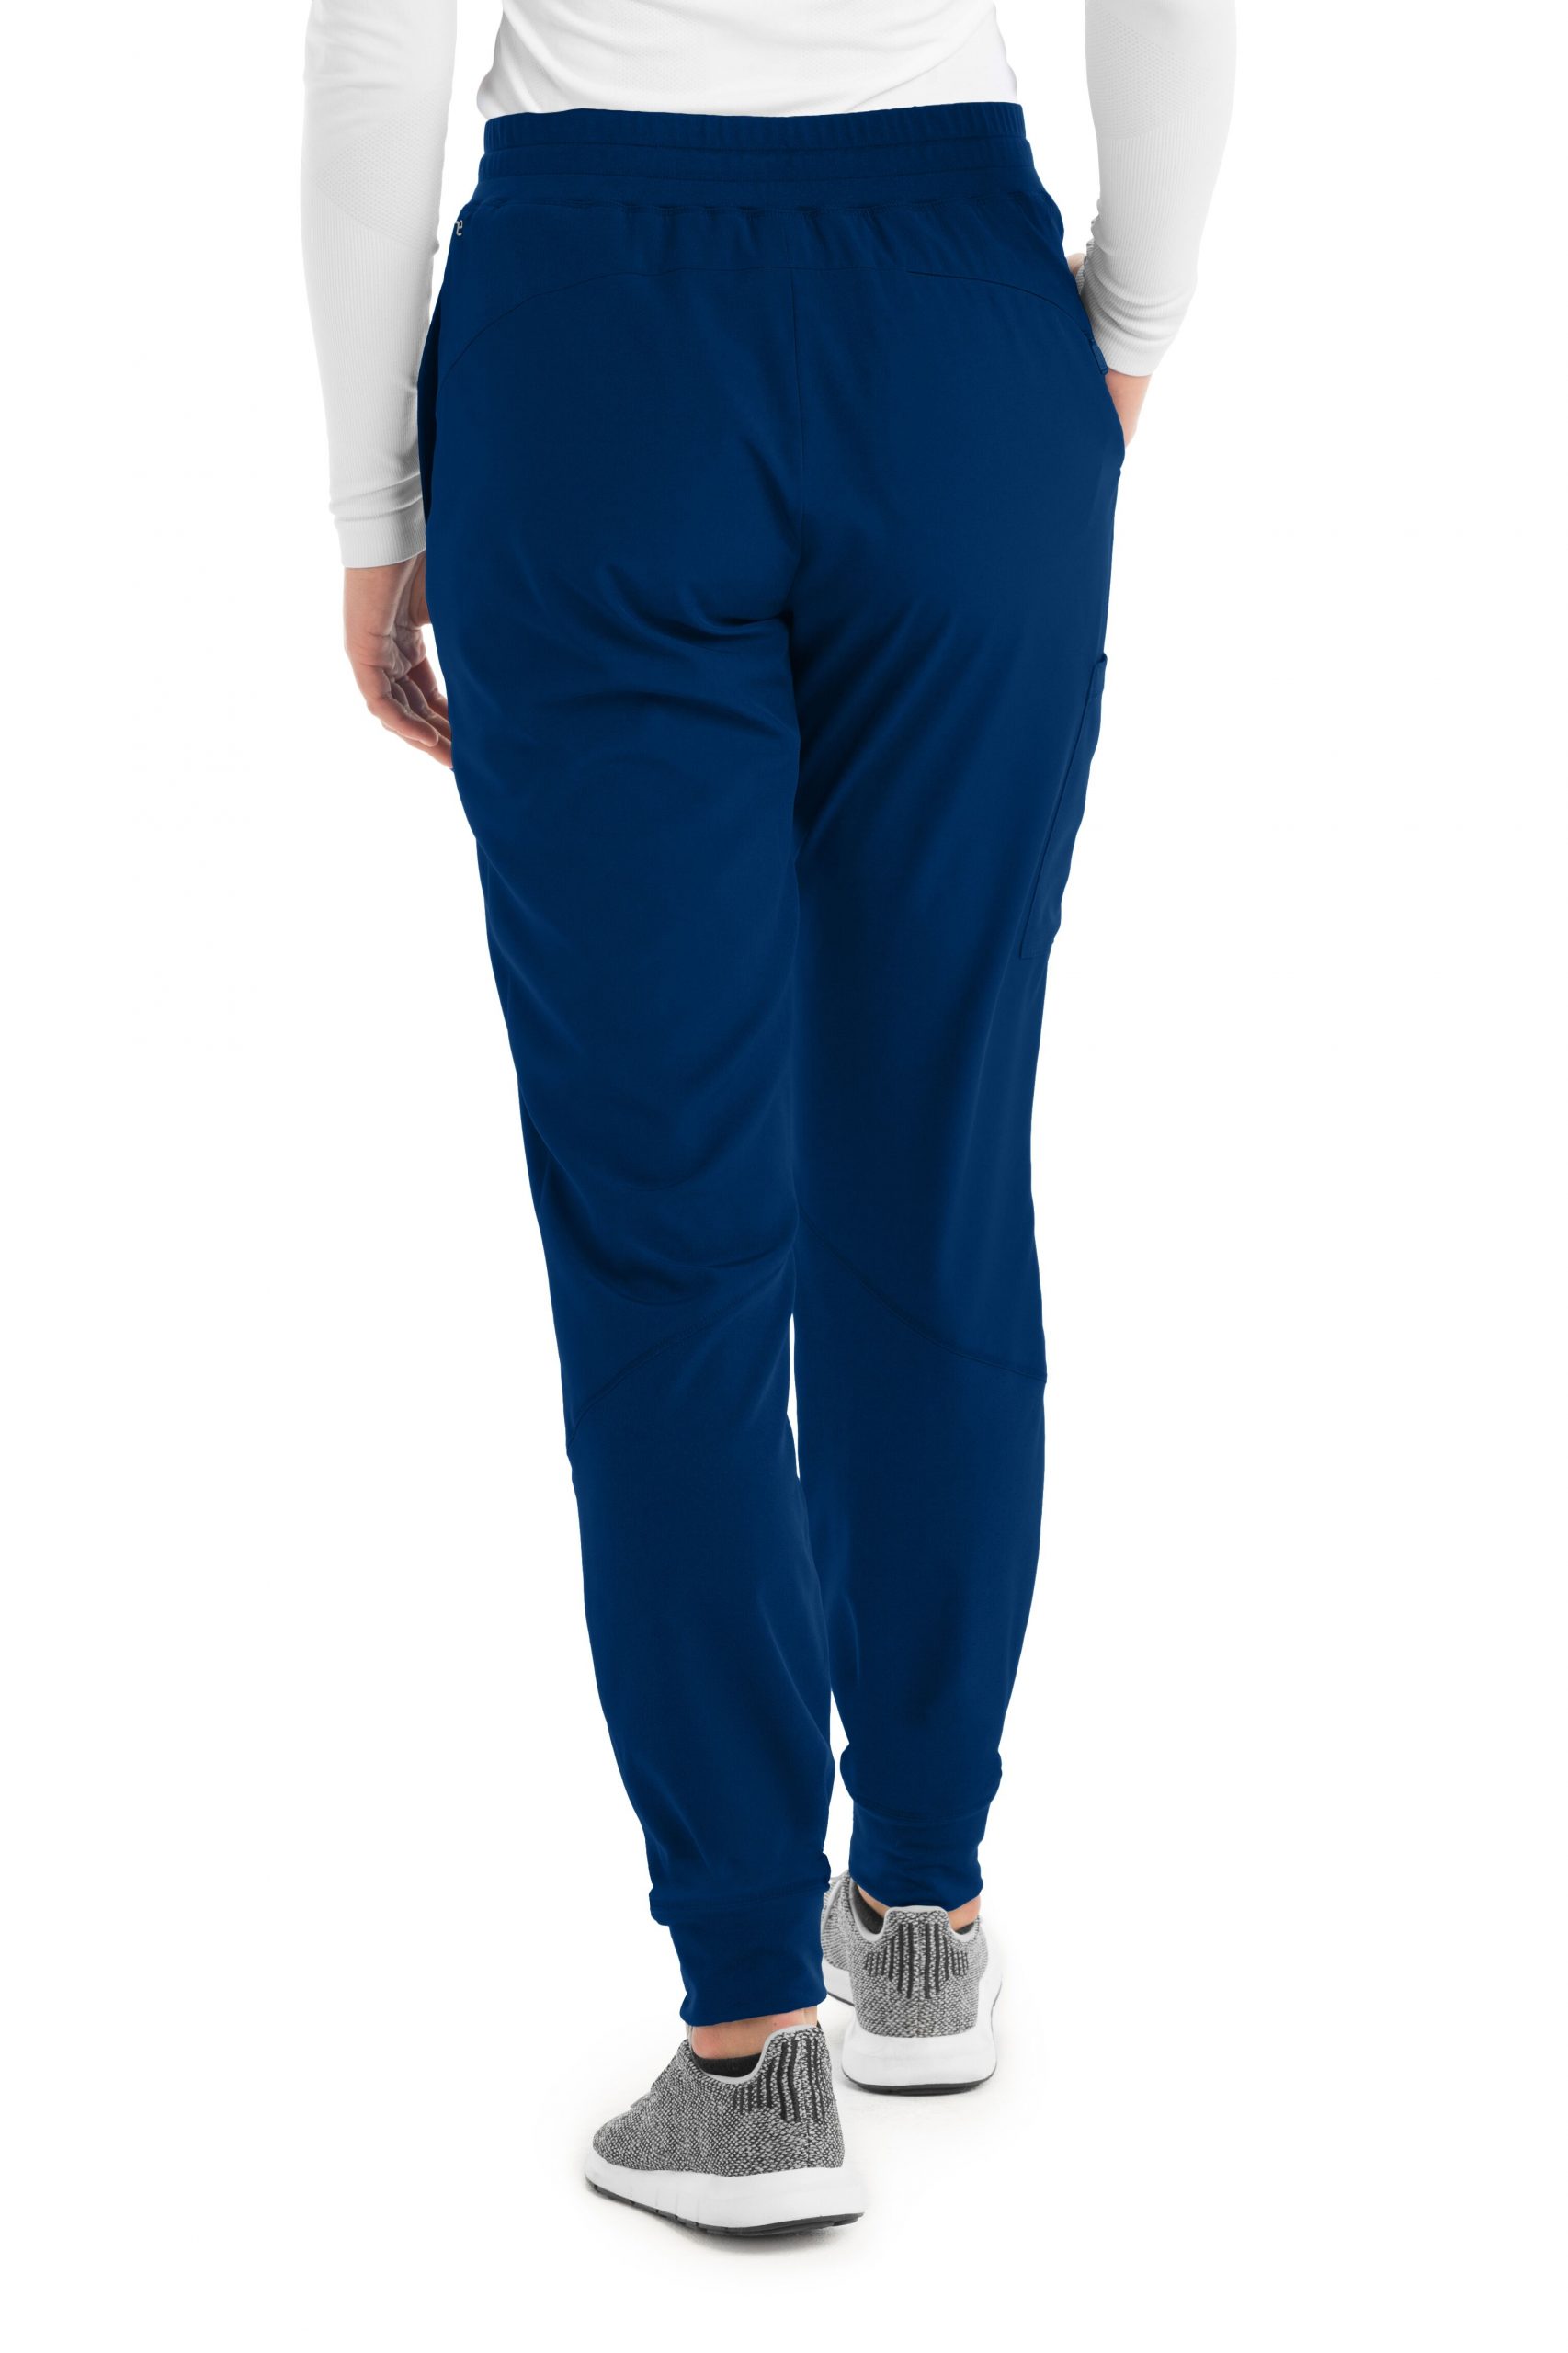 Barco One Jogger Pant – Scrubser